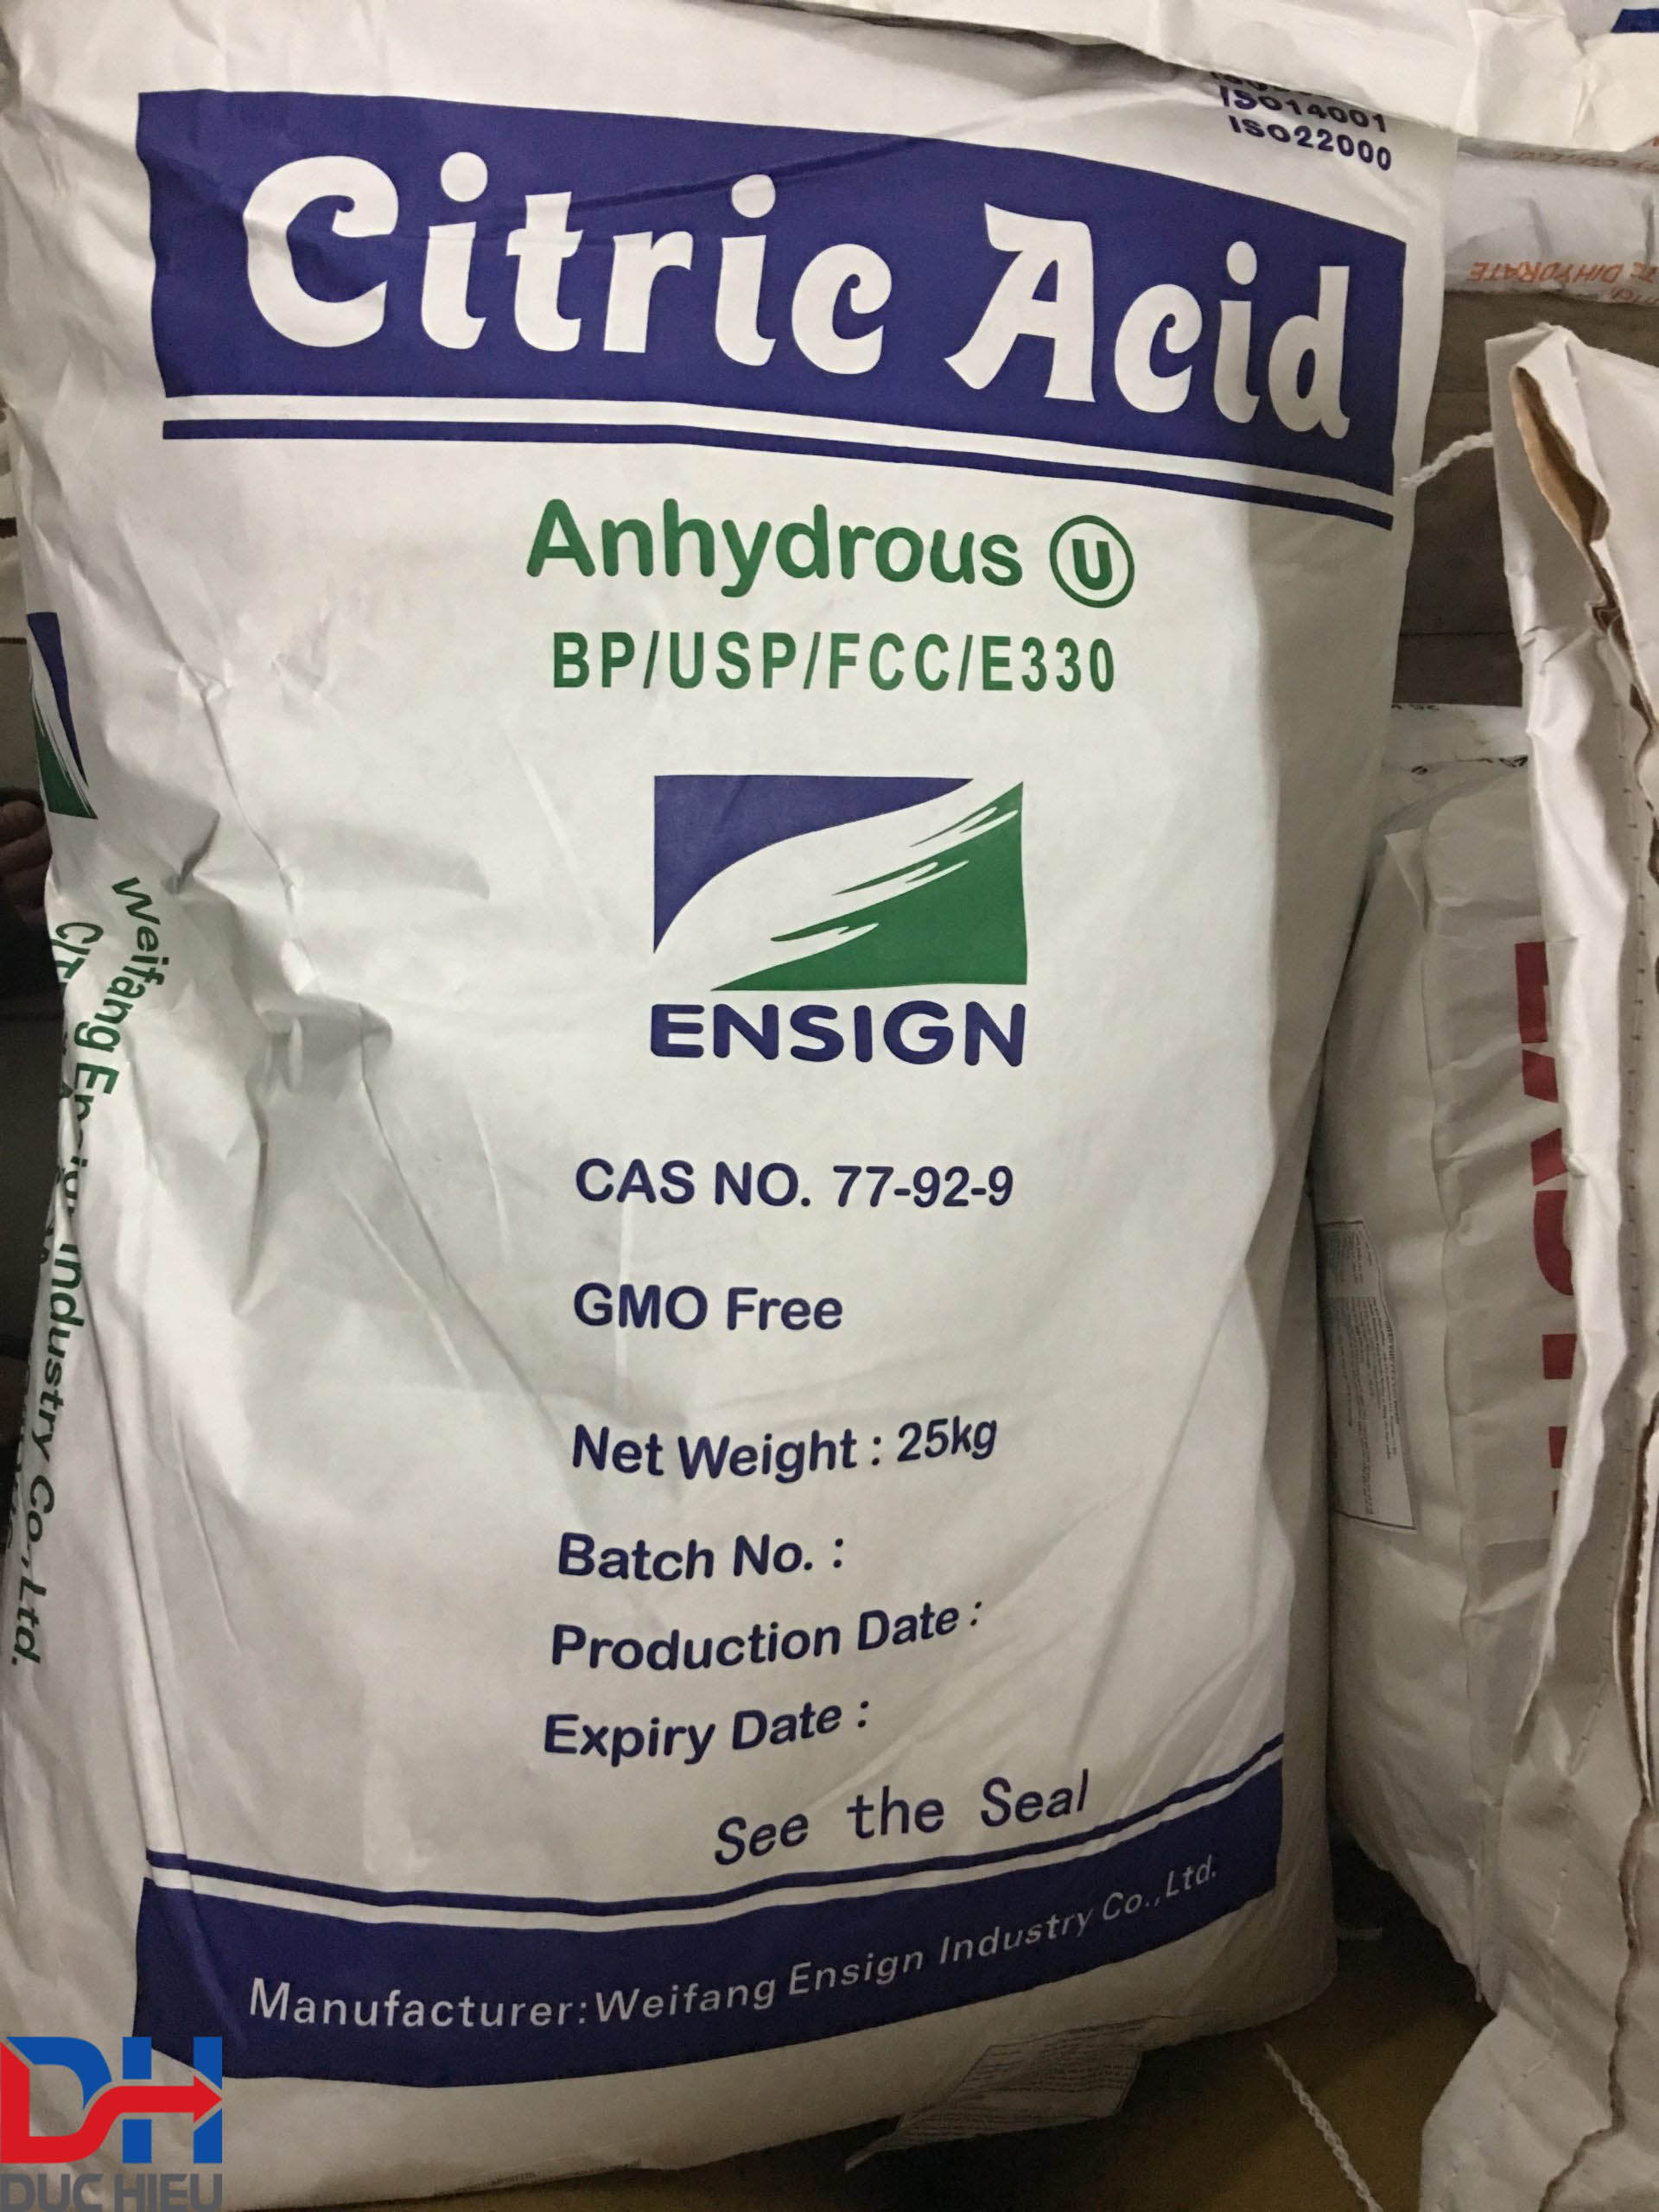 Acid Citric Anhydrous 